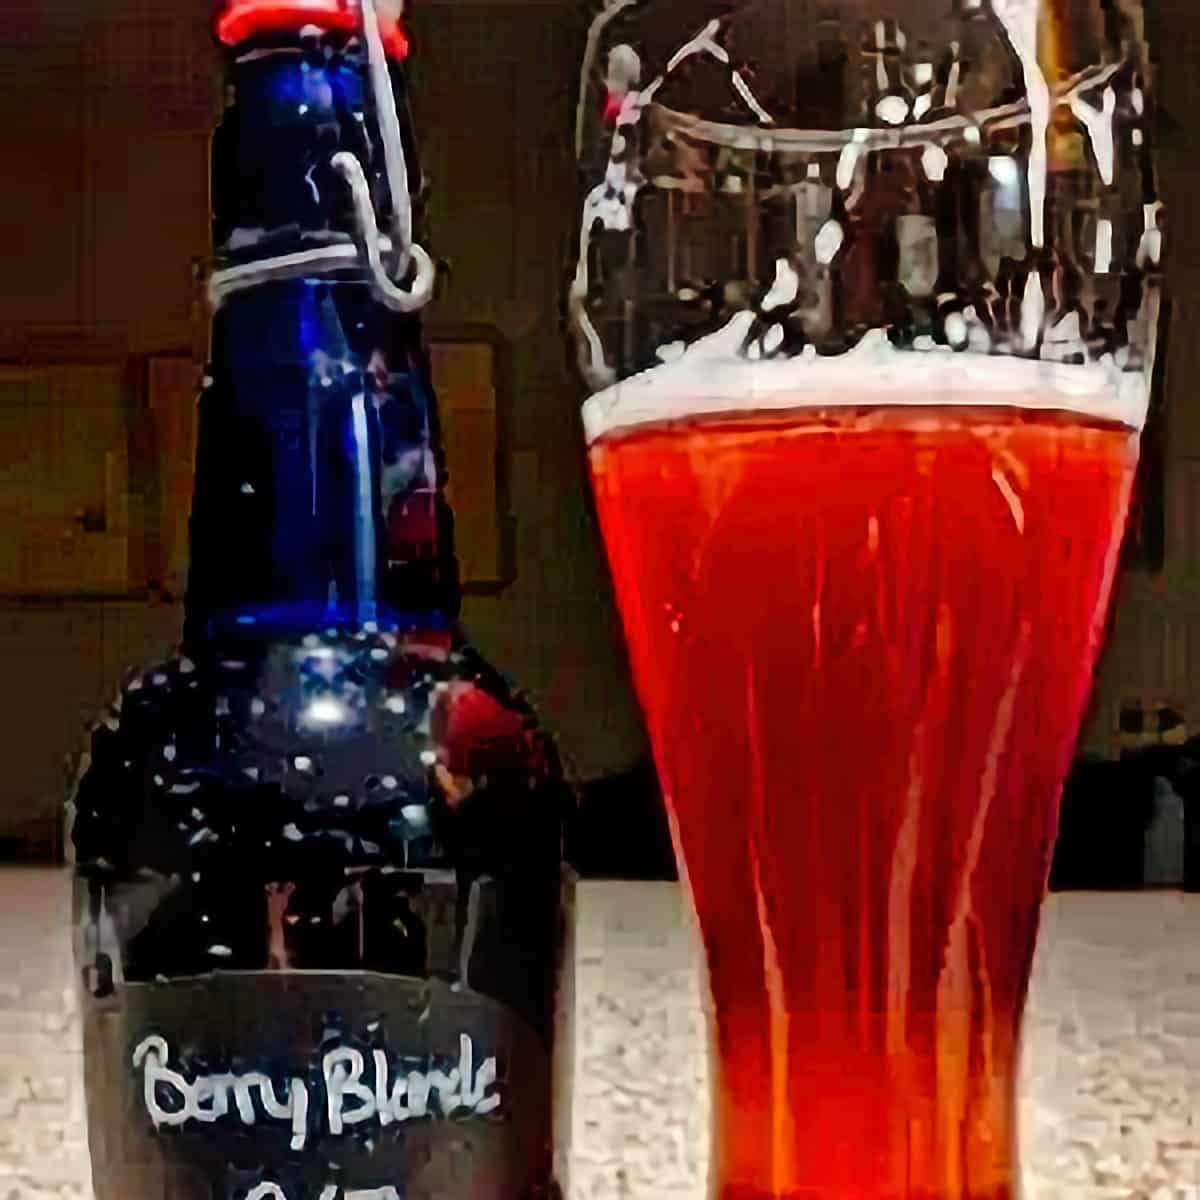 2. Berry Blonde Ale Beer Recipe - 1 gallon beer recipes